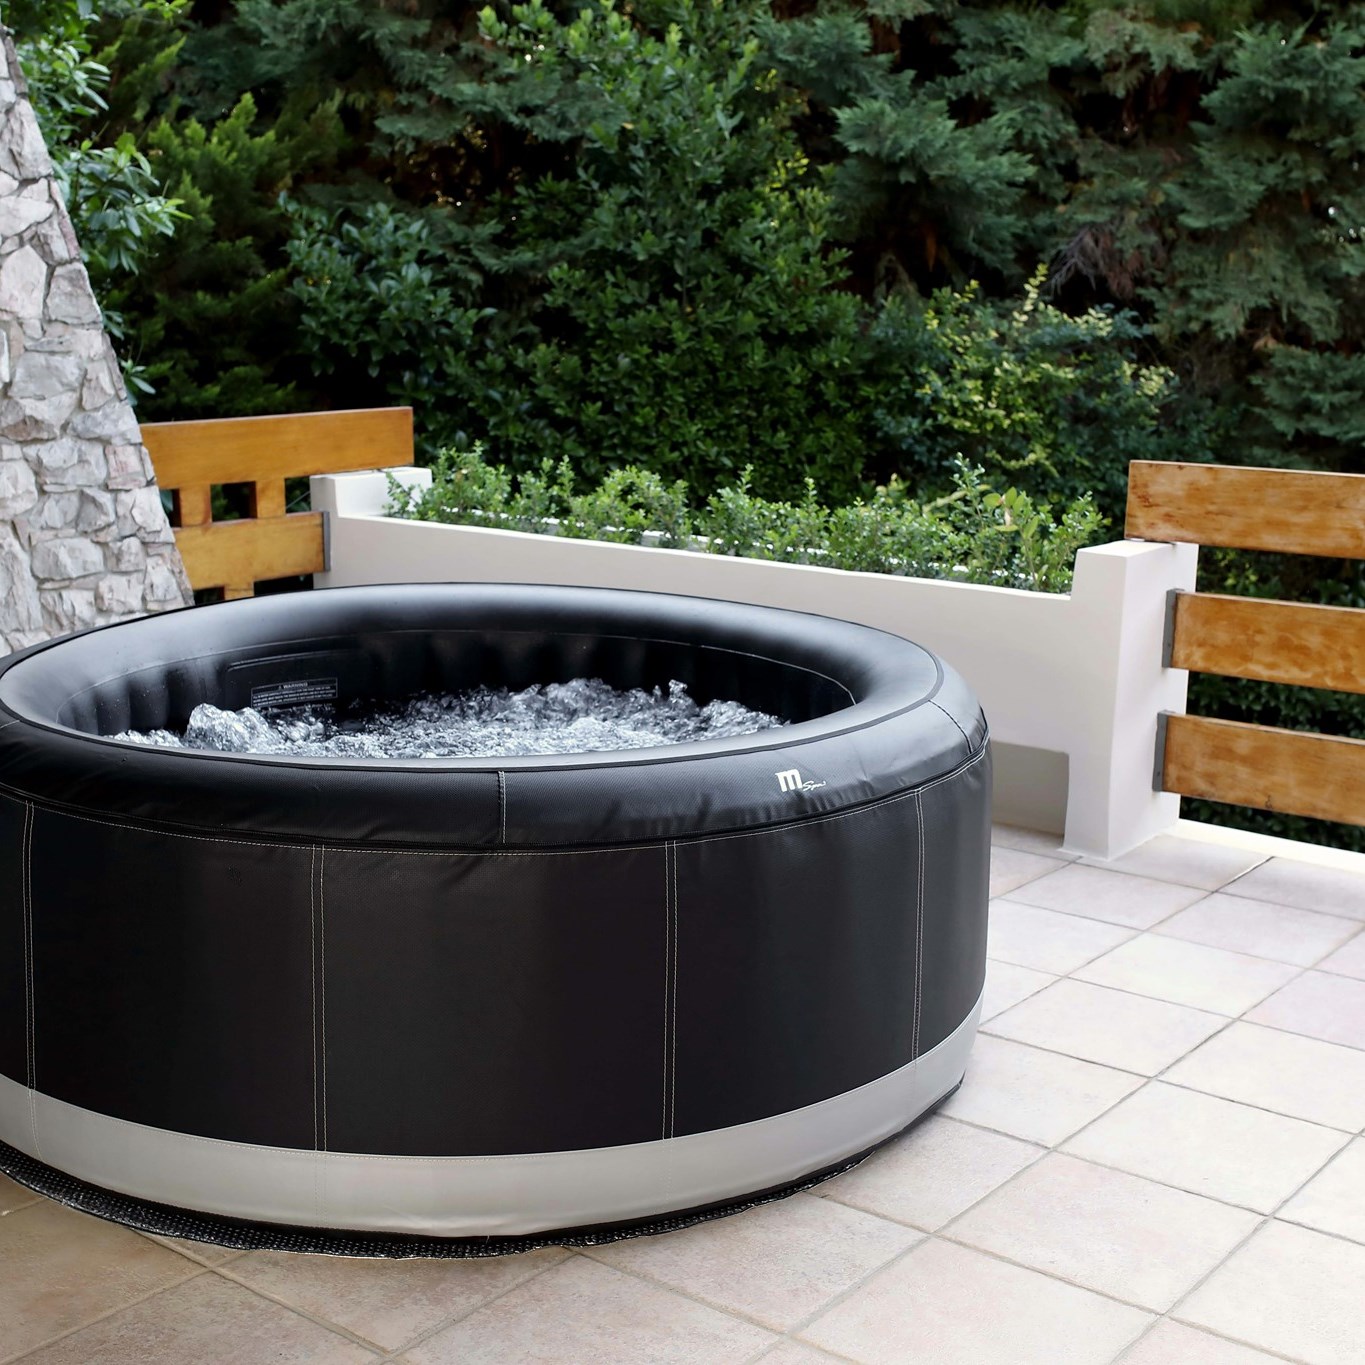 Need a good reason to explain to your partner why you want to buy this beautiful MSpa Premium Series Camaro inflatable h... » Outdoor Furniture Fuengirola, Costa Del Sol, Spain